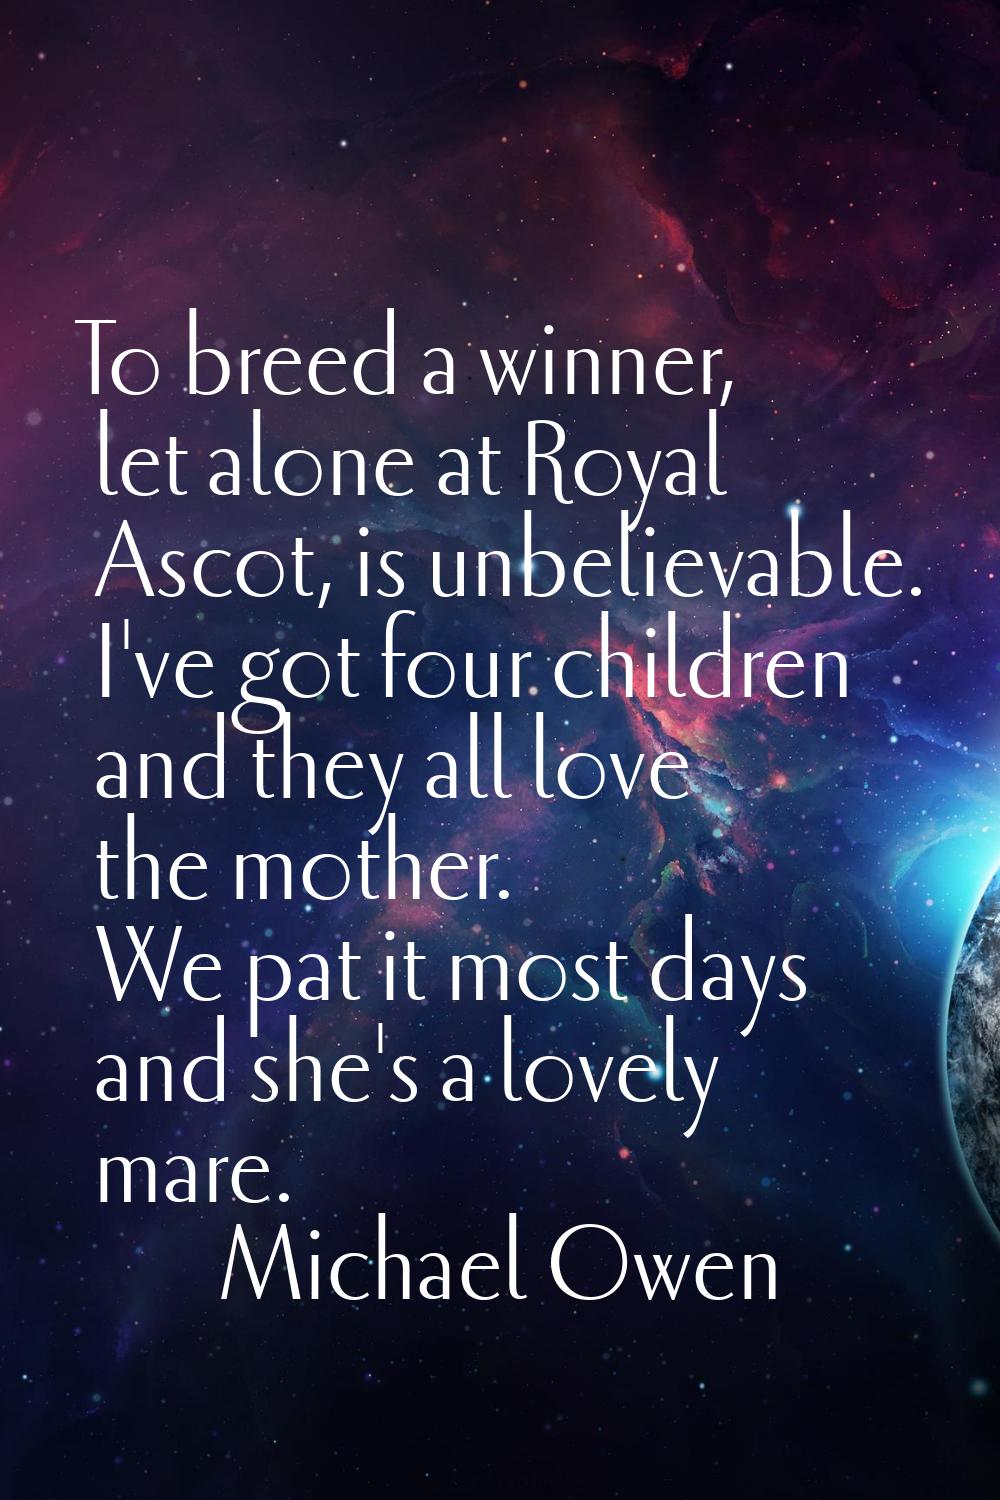 To breed a winner, let alone at Royal Ascot, is unbelievable. I've got four children and they all l